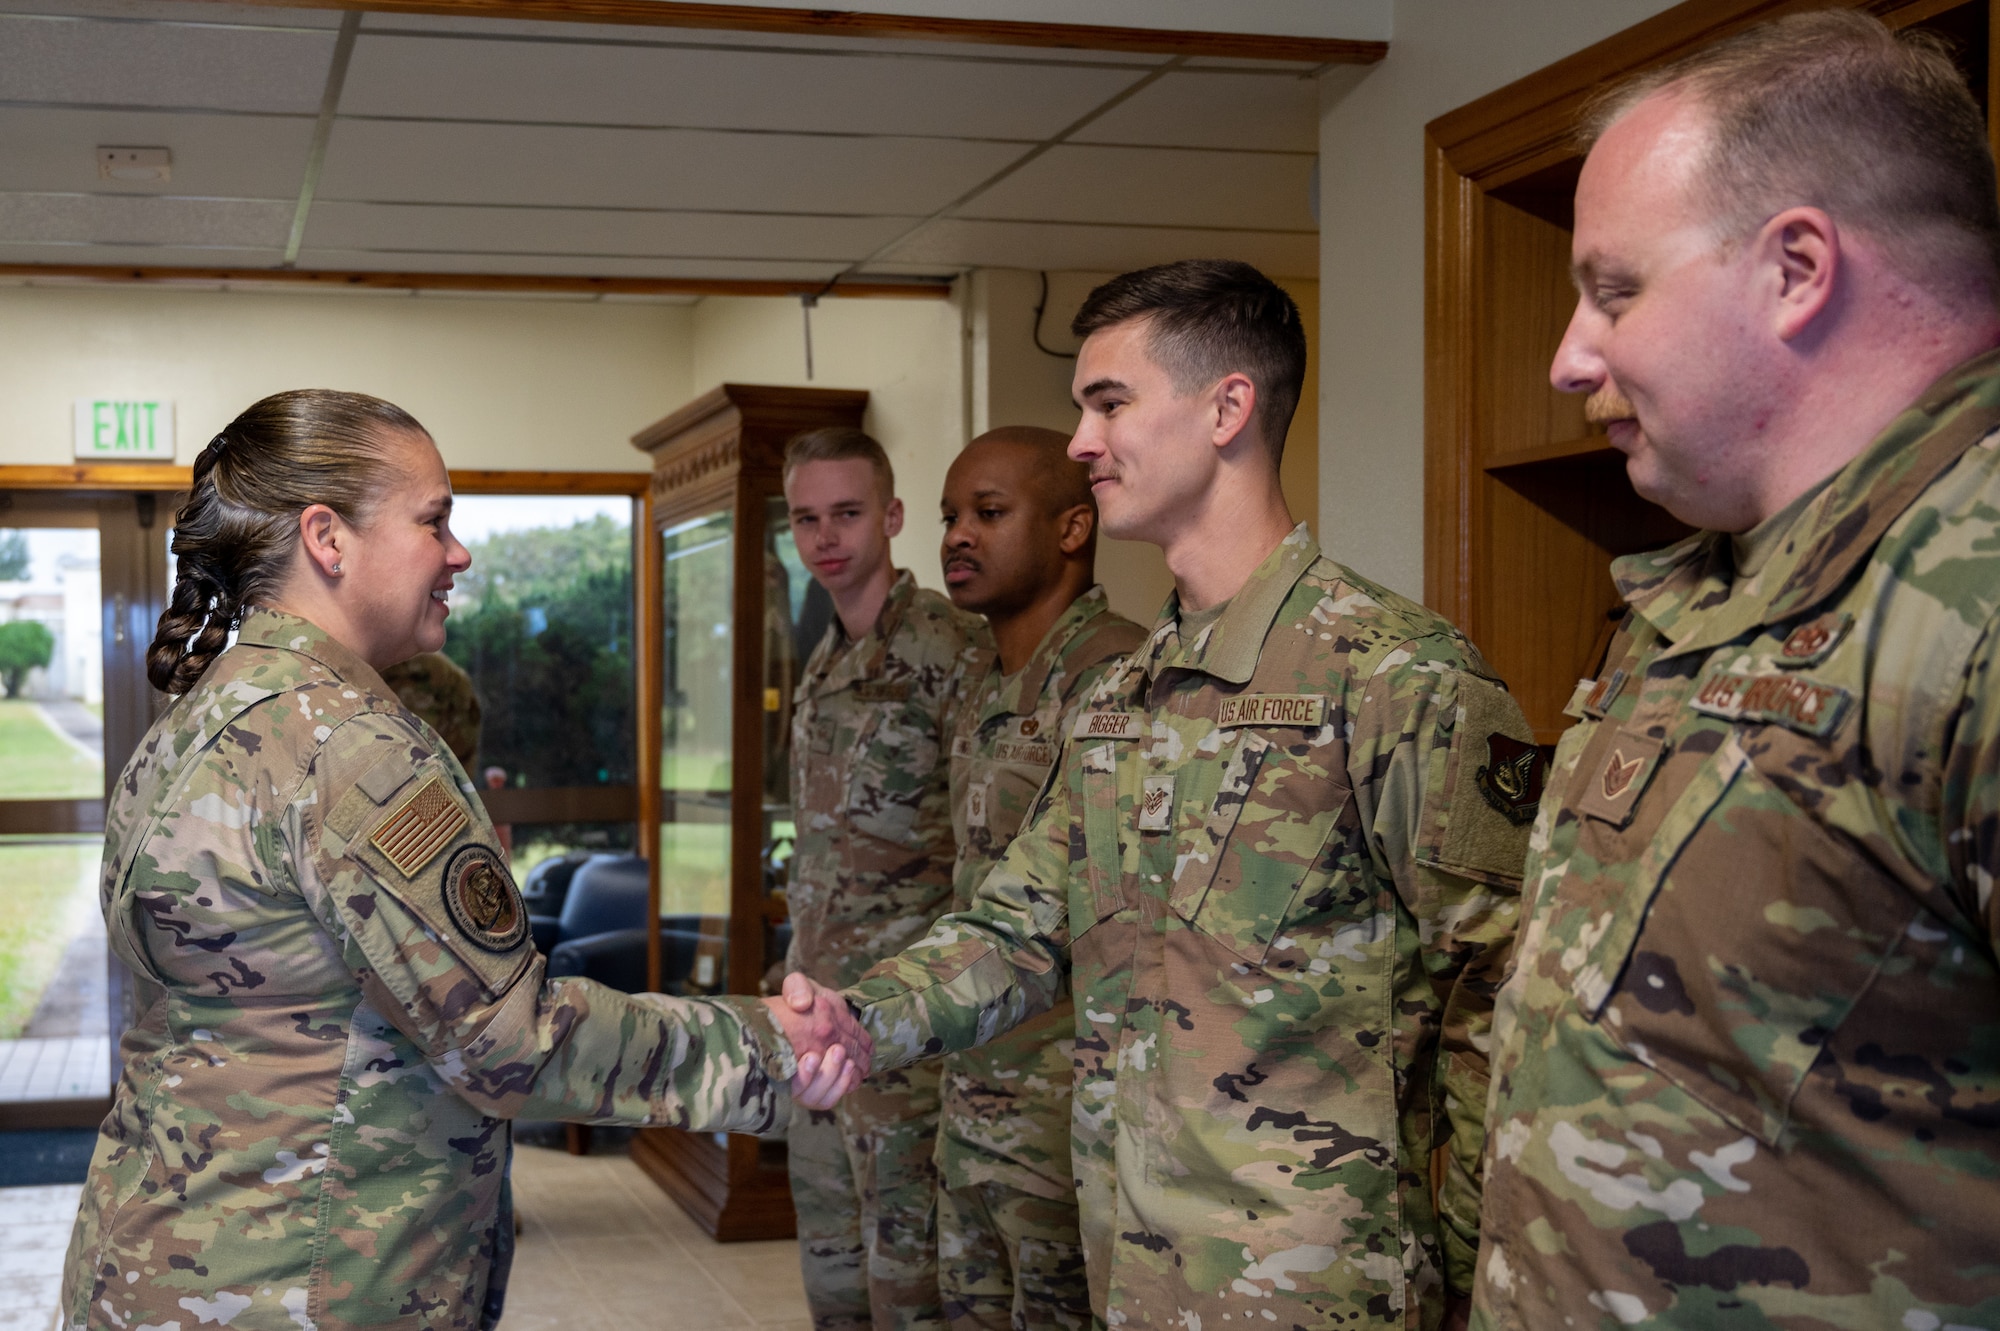 Airmen shaking each other's hand after receiving recognition.